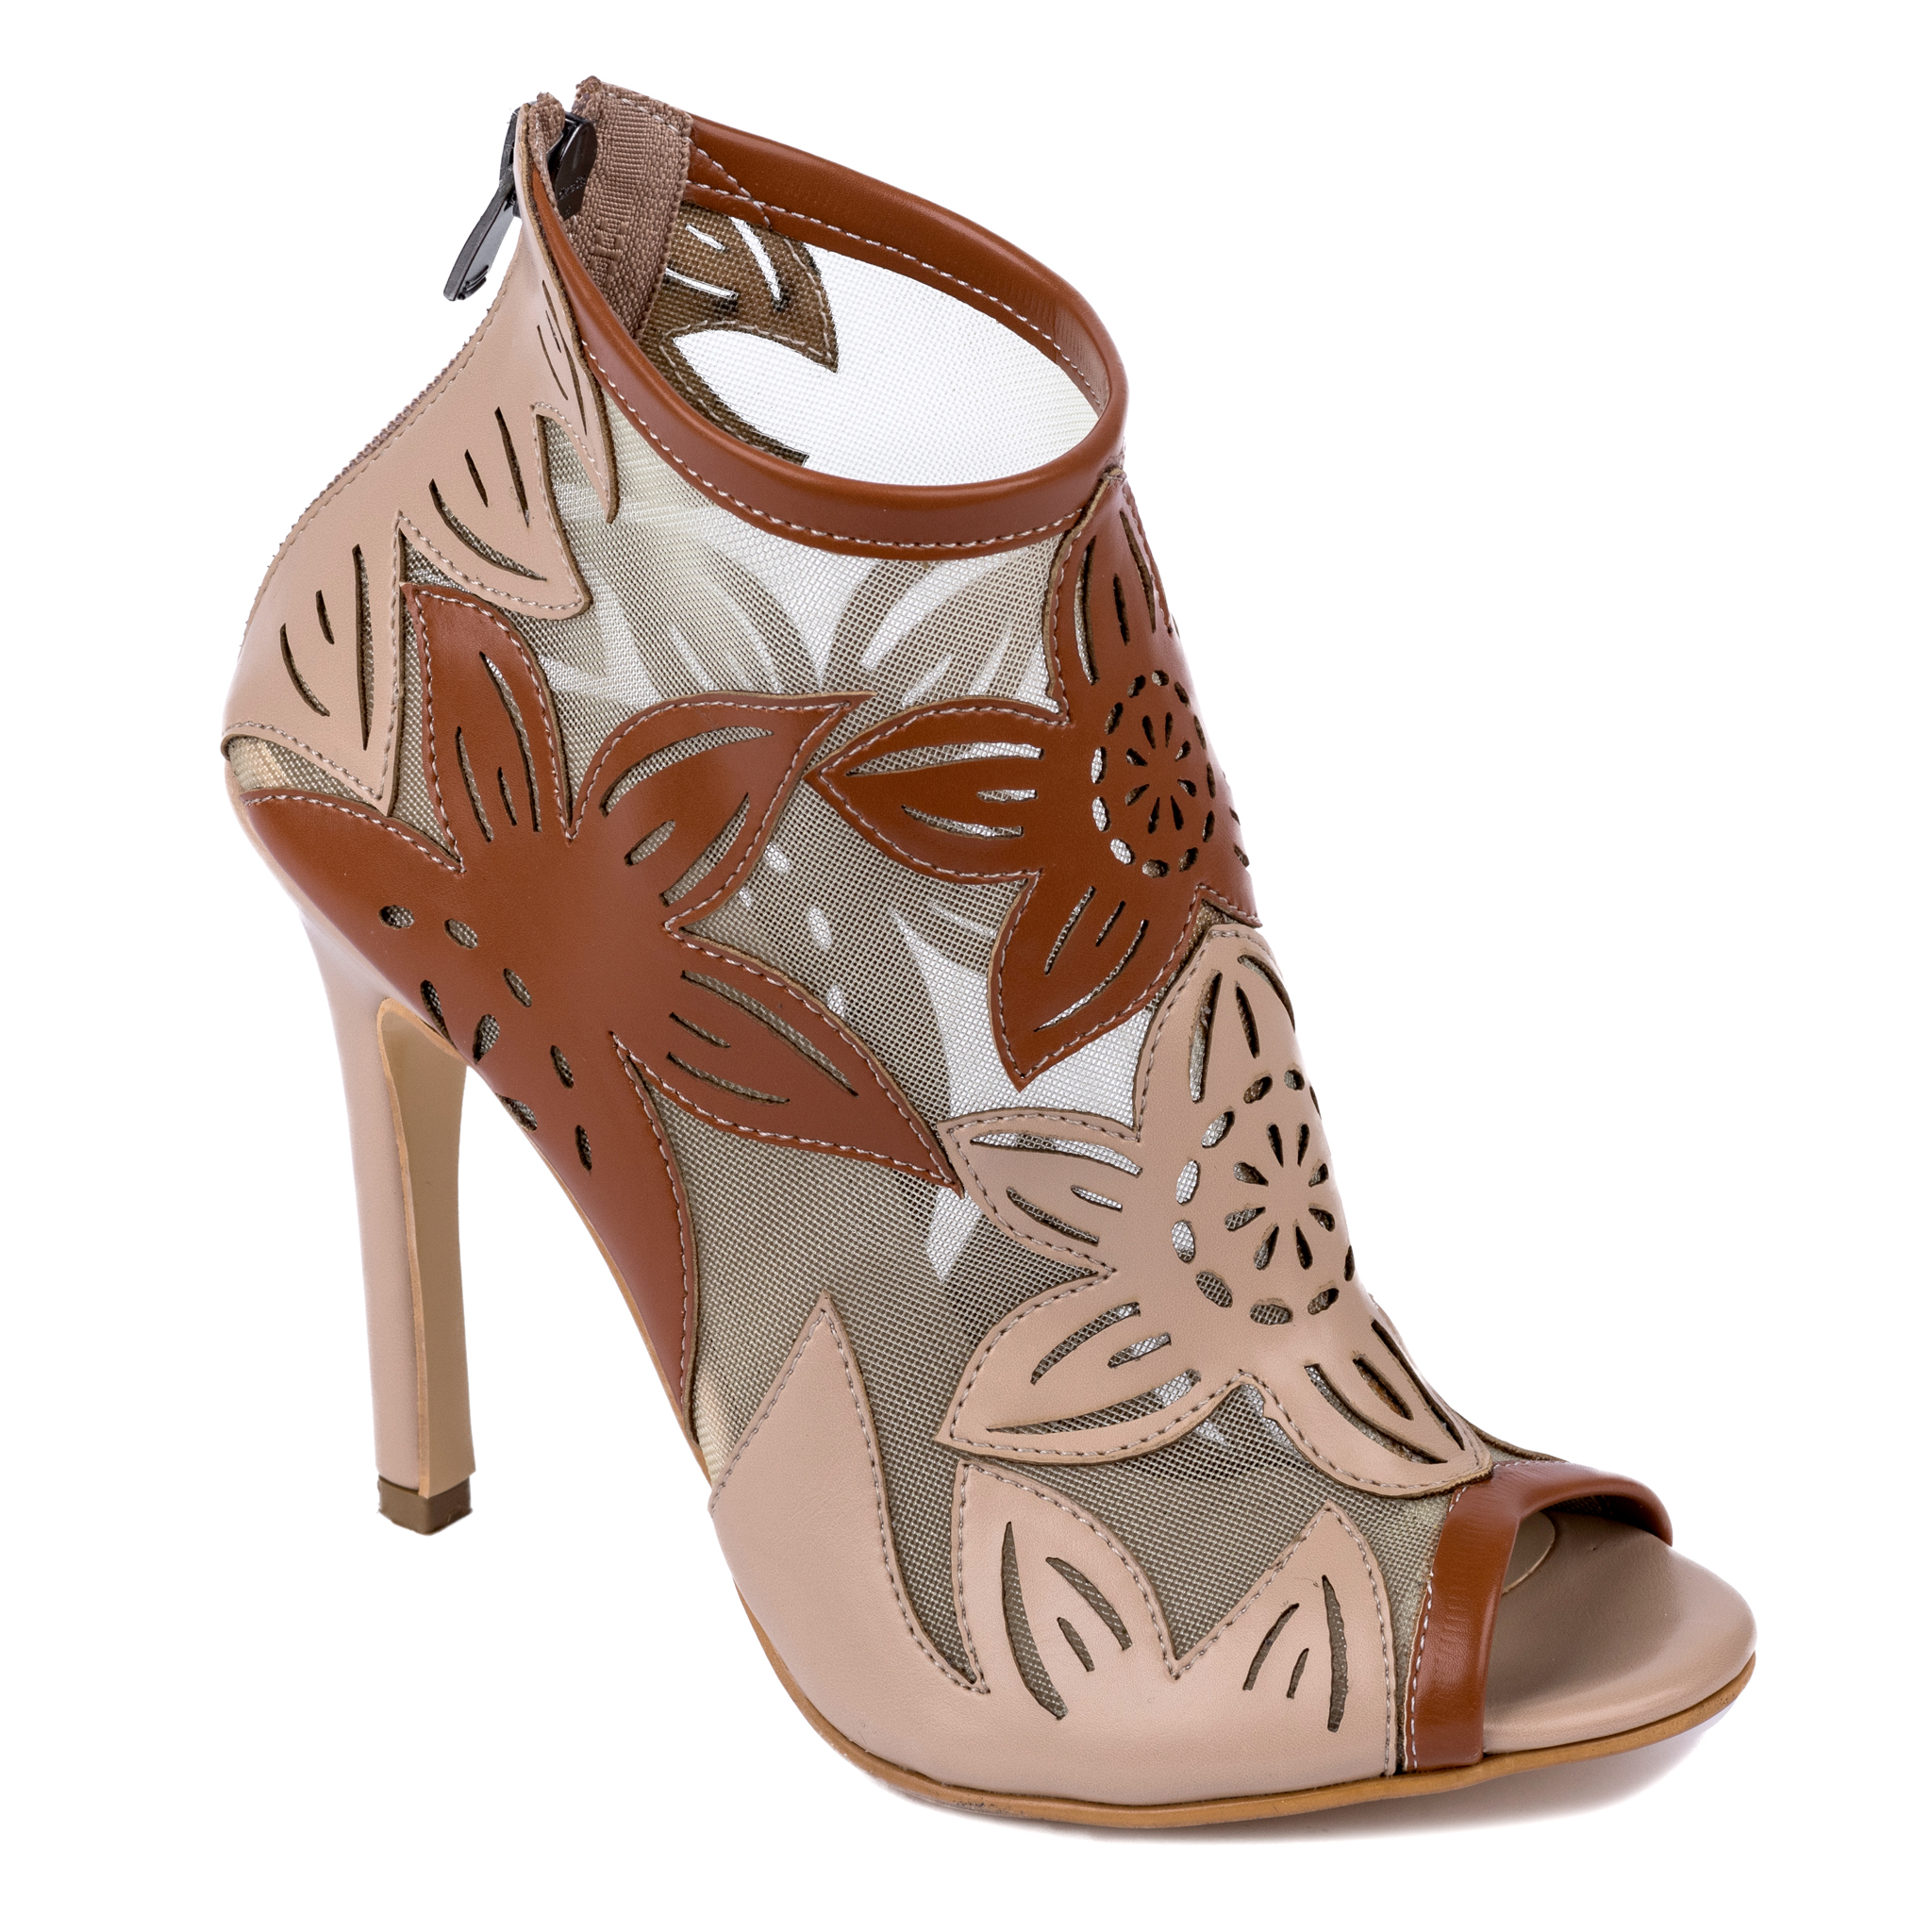 FLOWER PRINT SUMMER ANKLE BOOTS WITH THIN HEEL - BEIGE/CAMEL